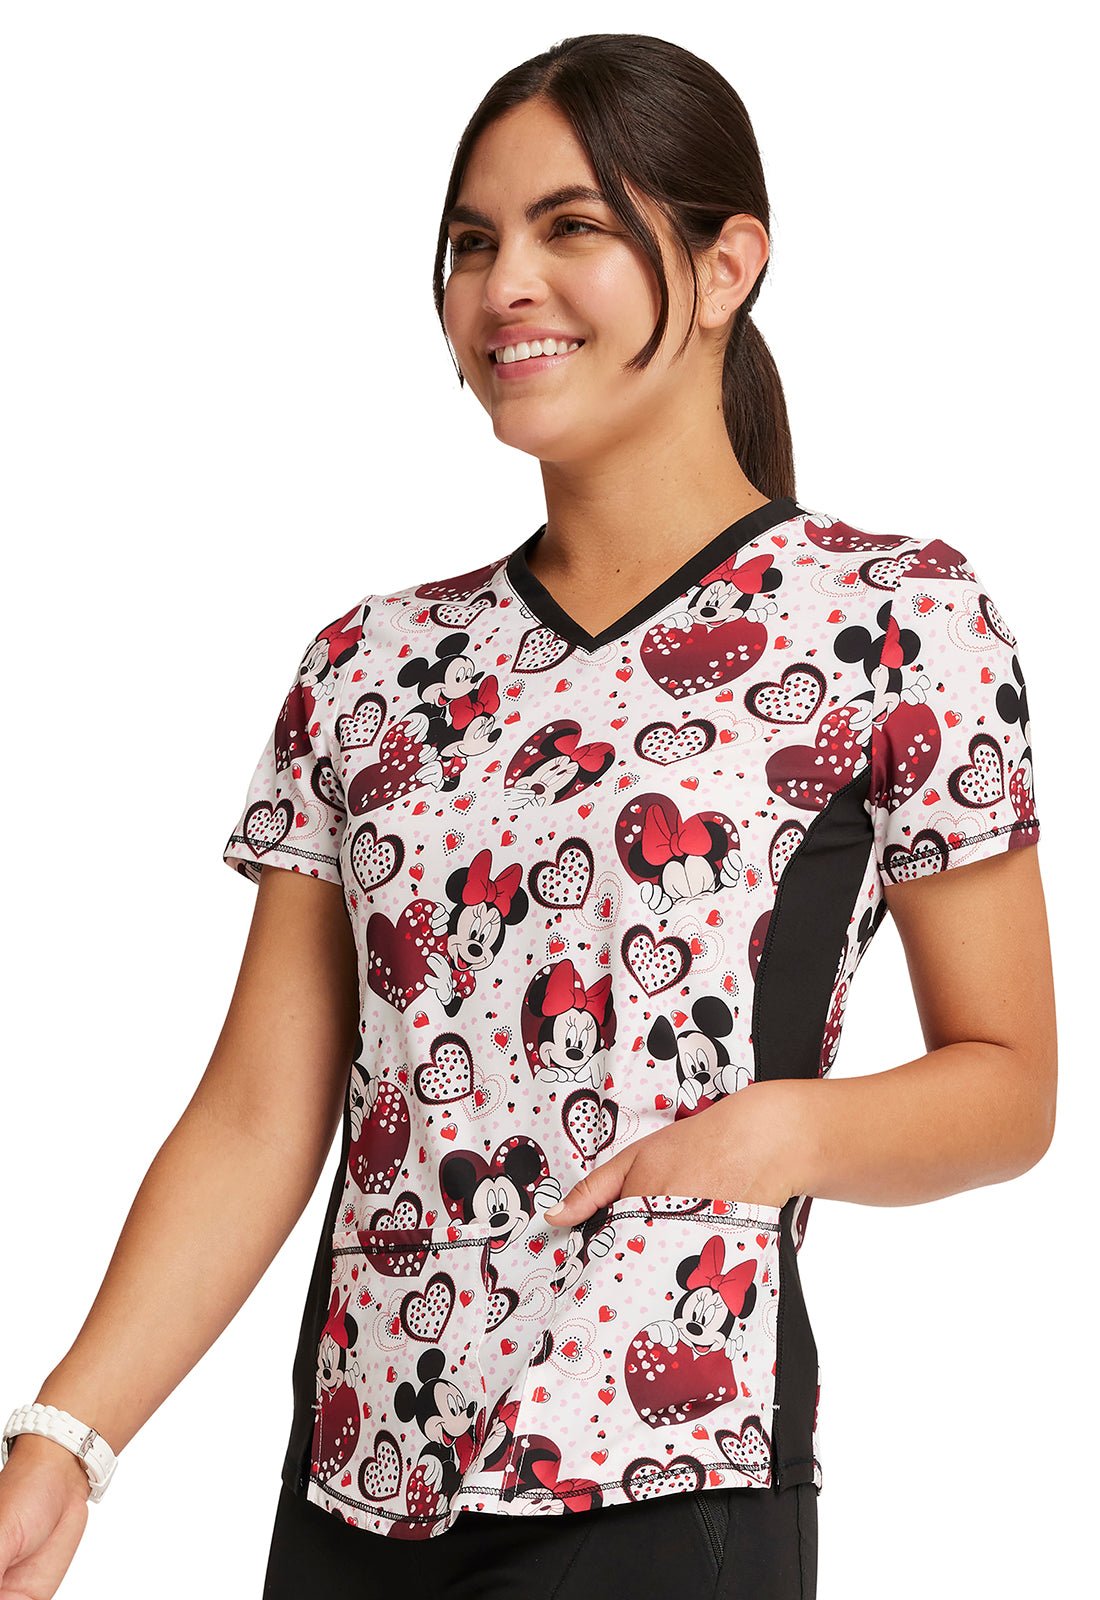 Mickey Minnie Mouse Tooniforms Disney V Neck Top TF783 MKRH - Scrubs Select